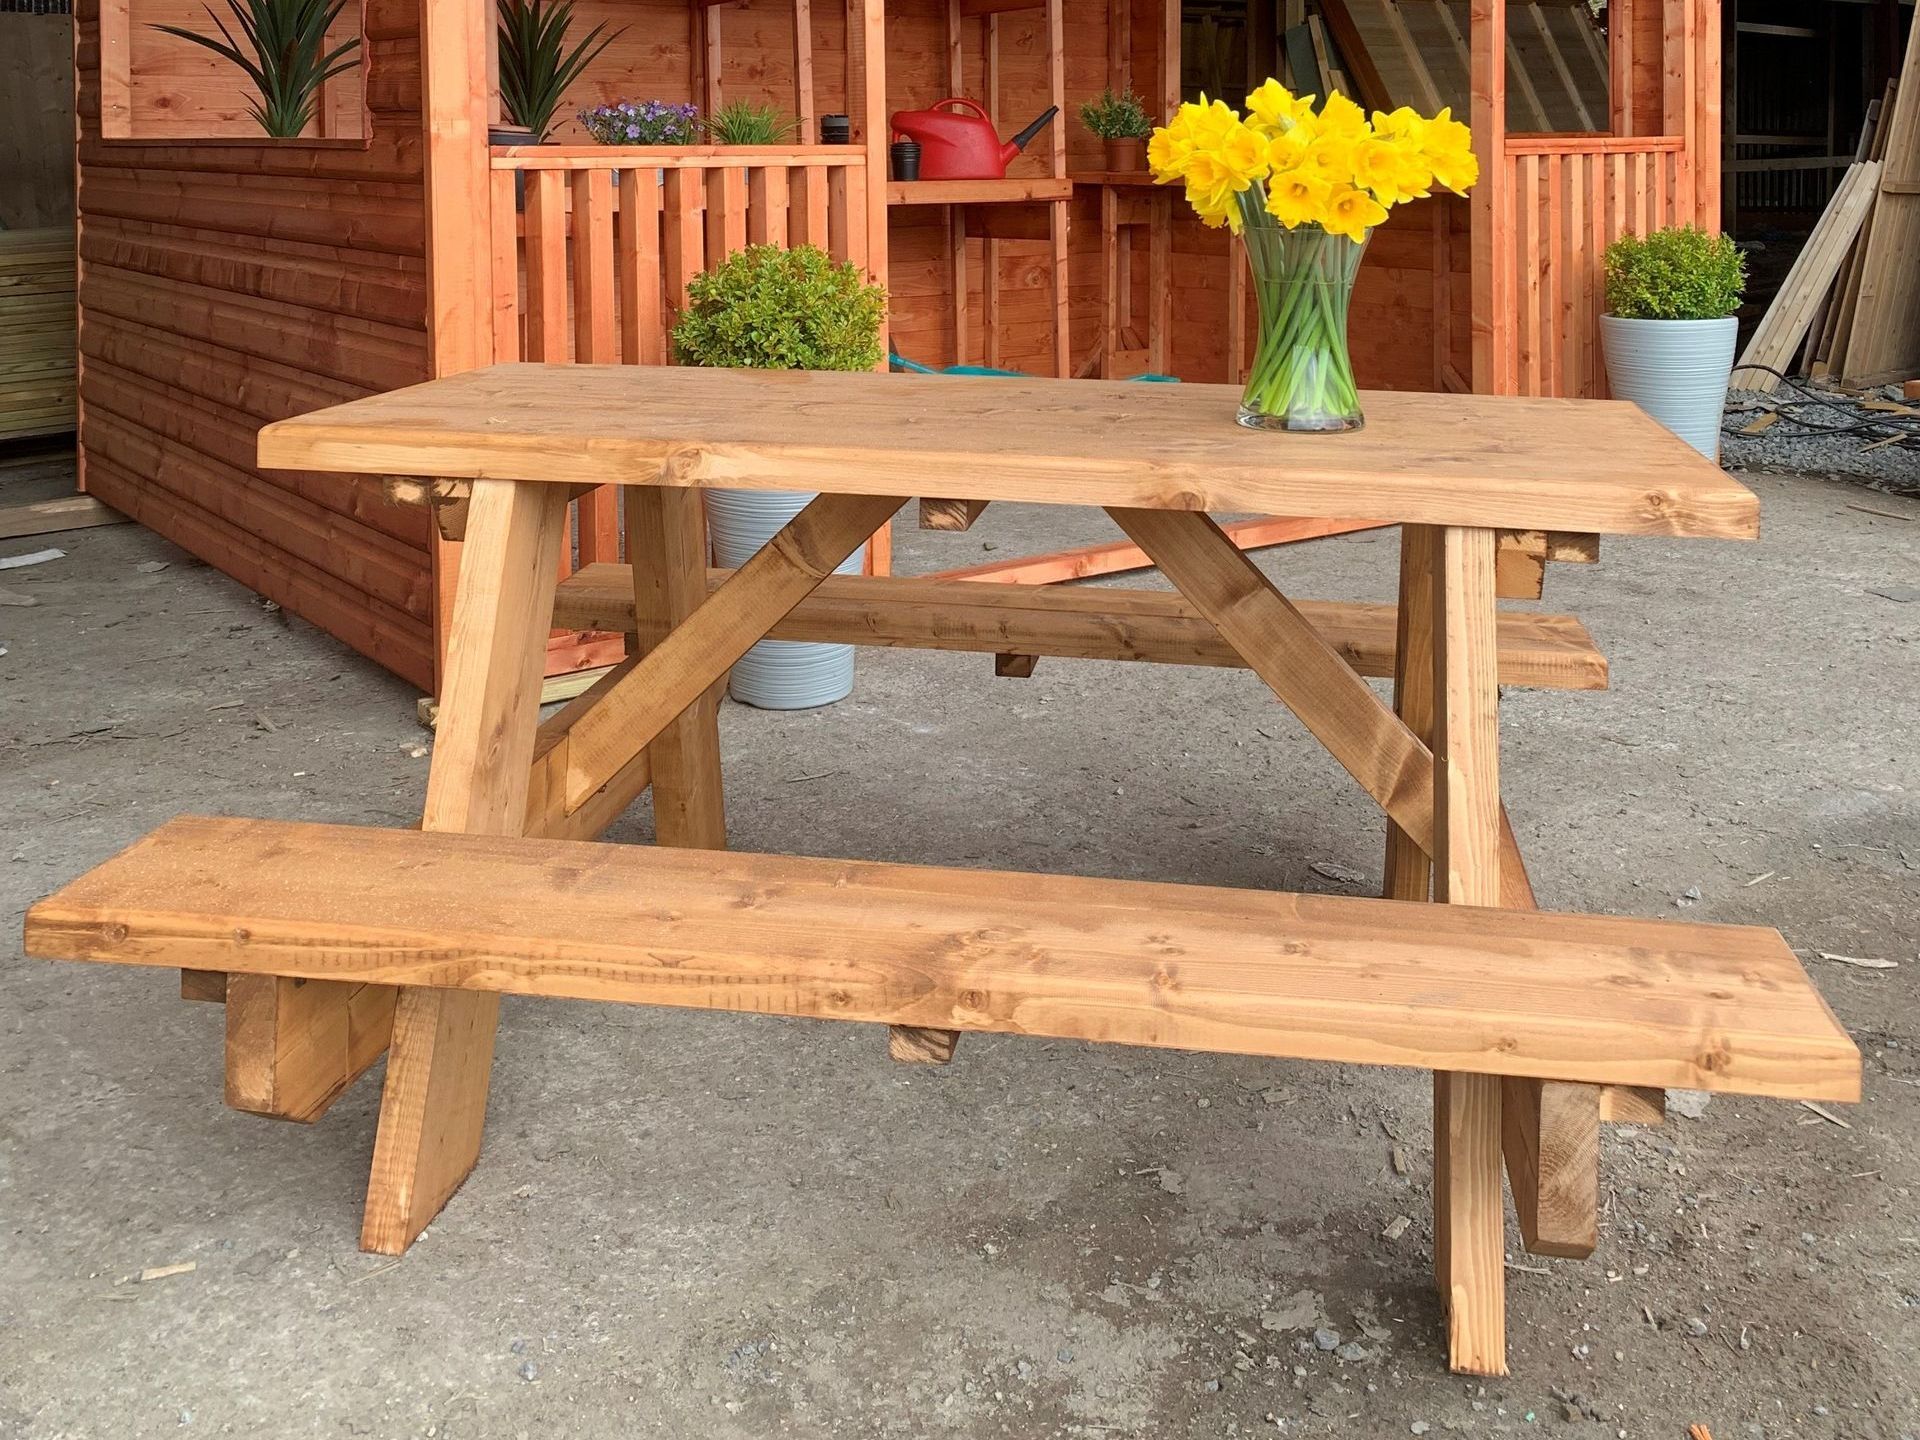 Low height picnic table on display.